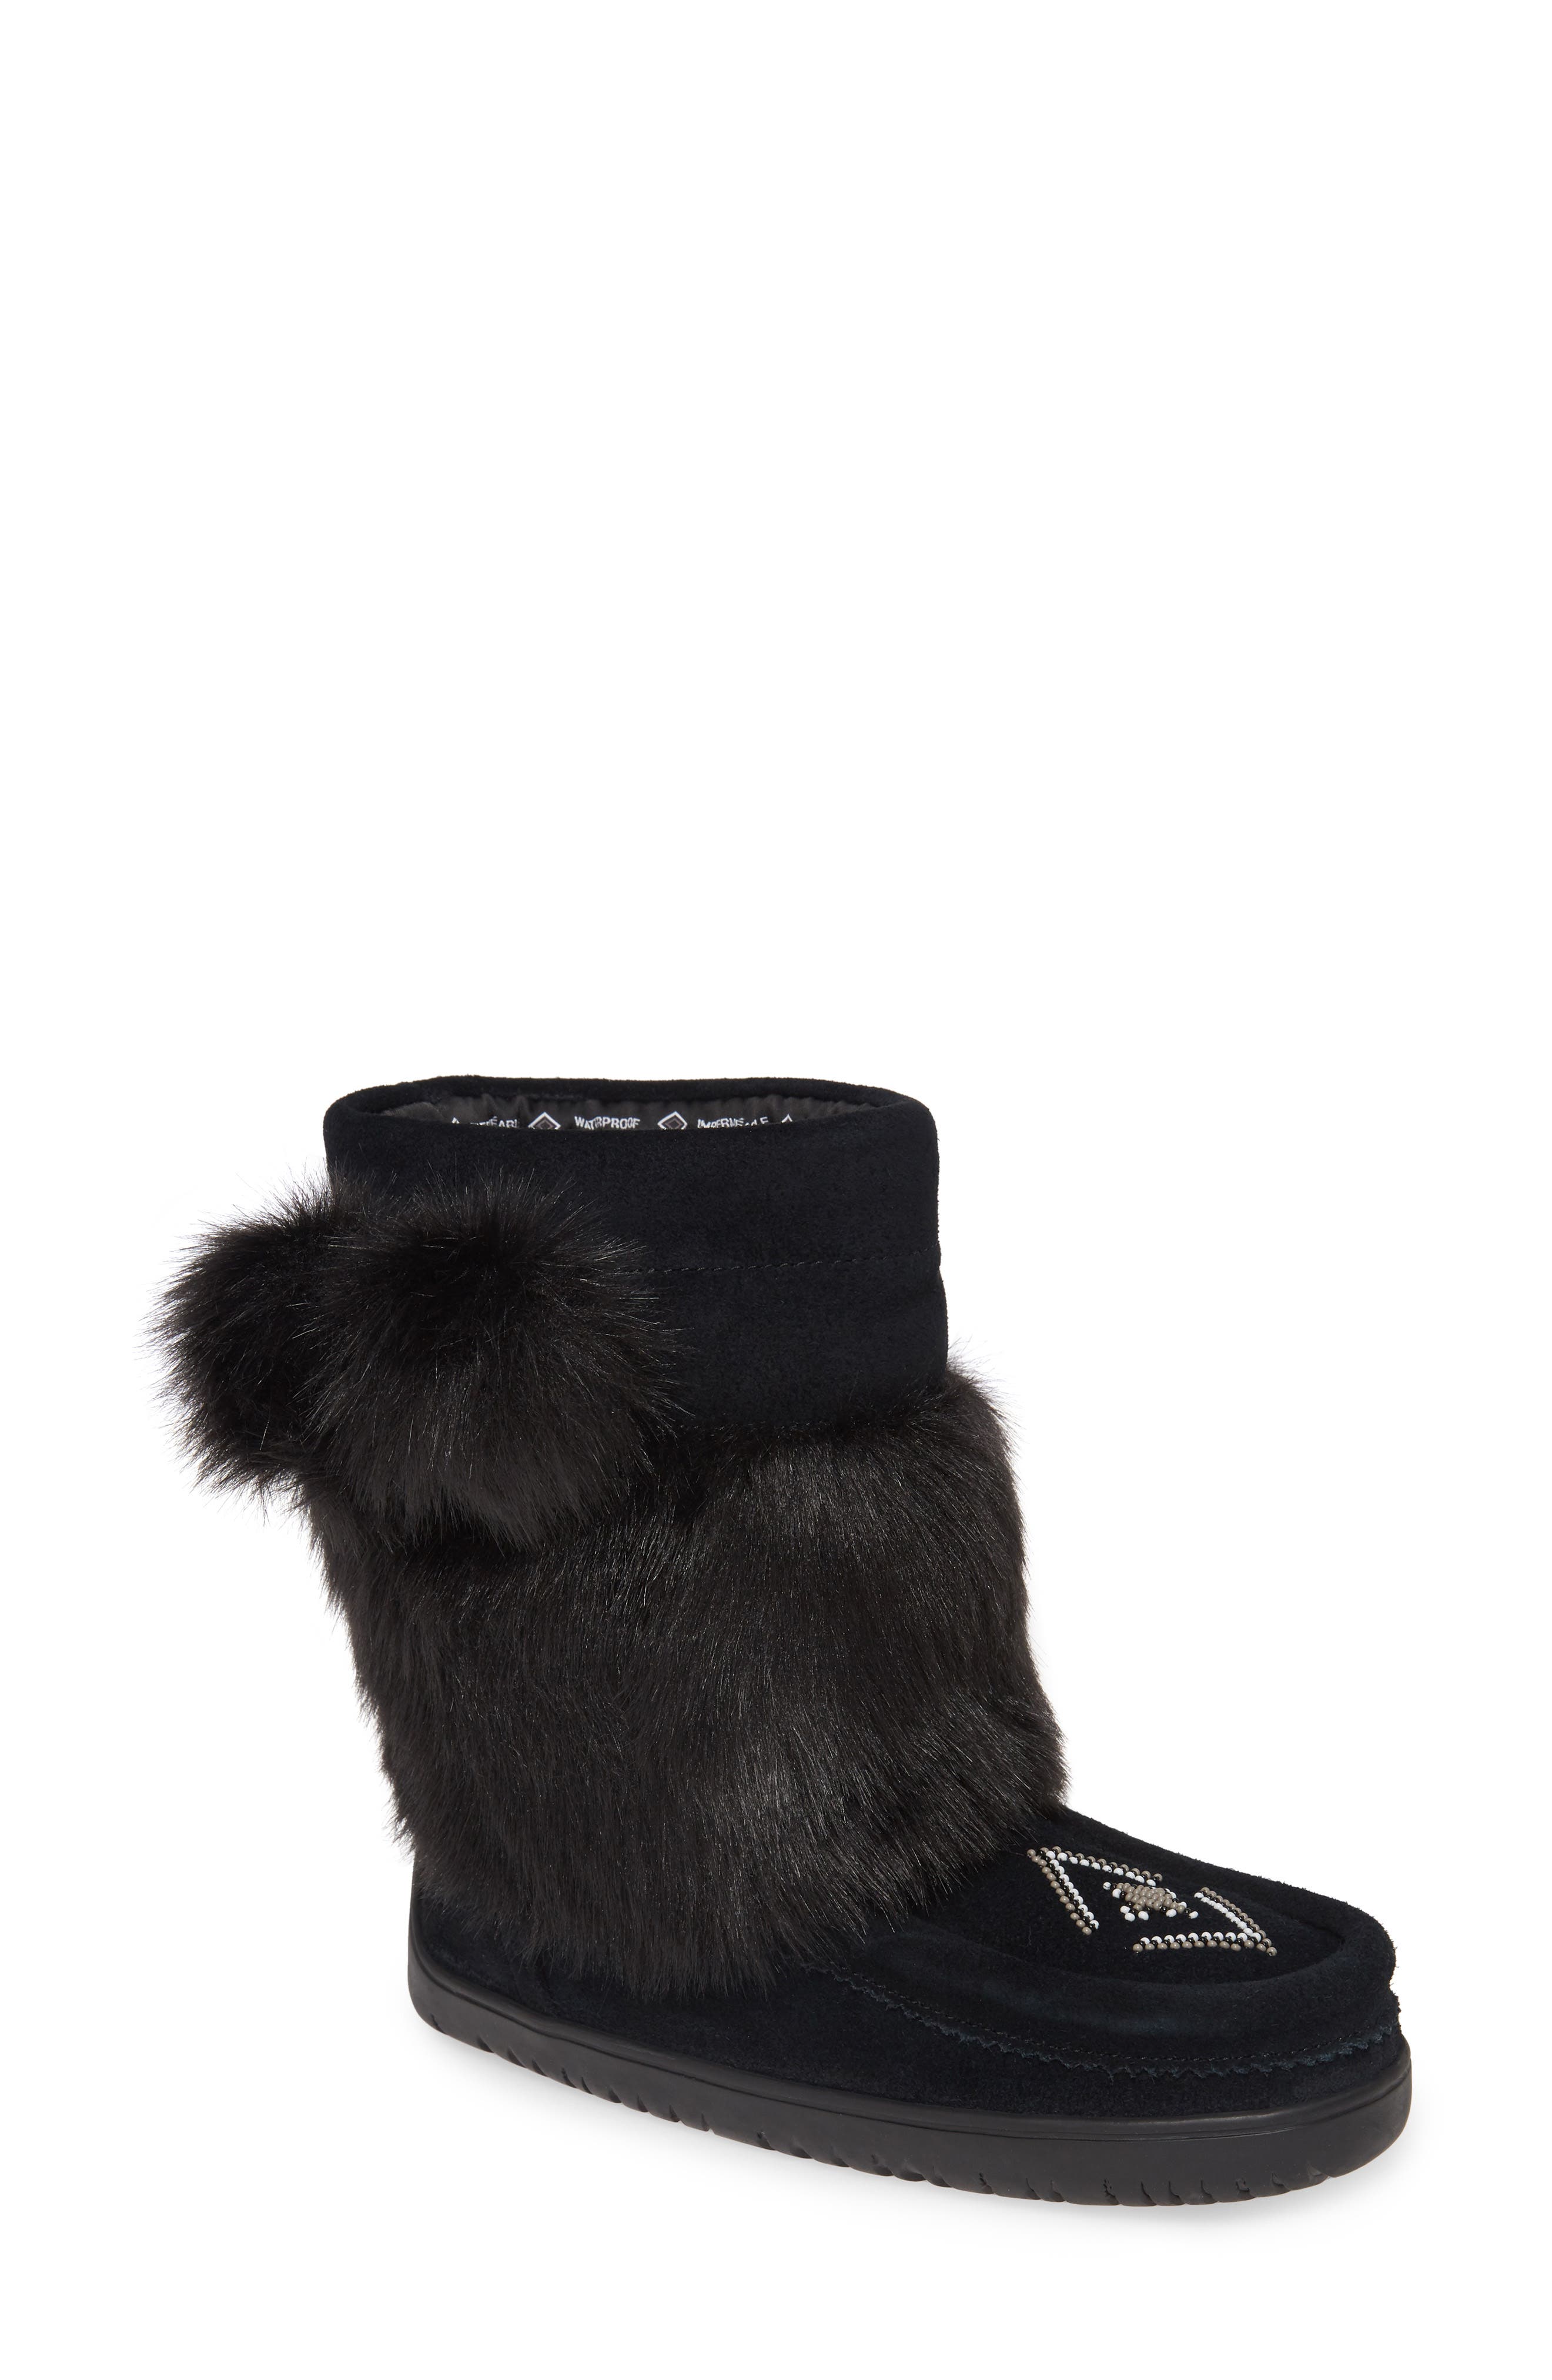 boots covered in fur